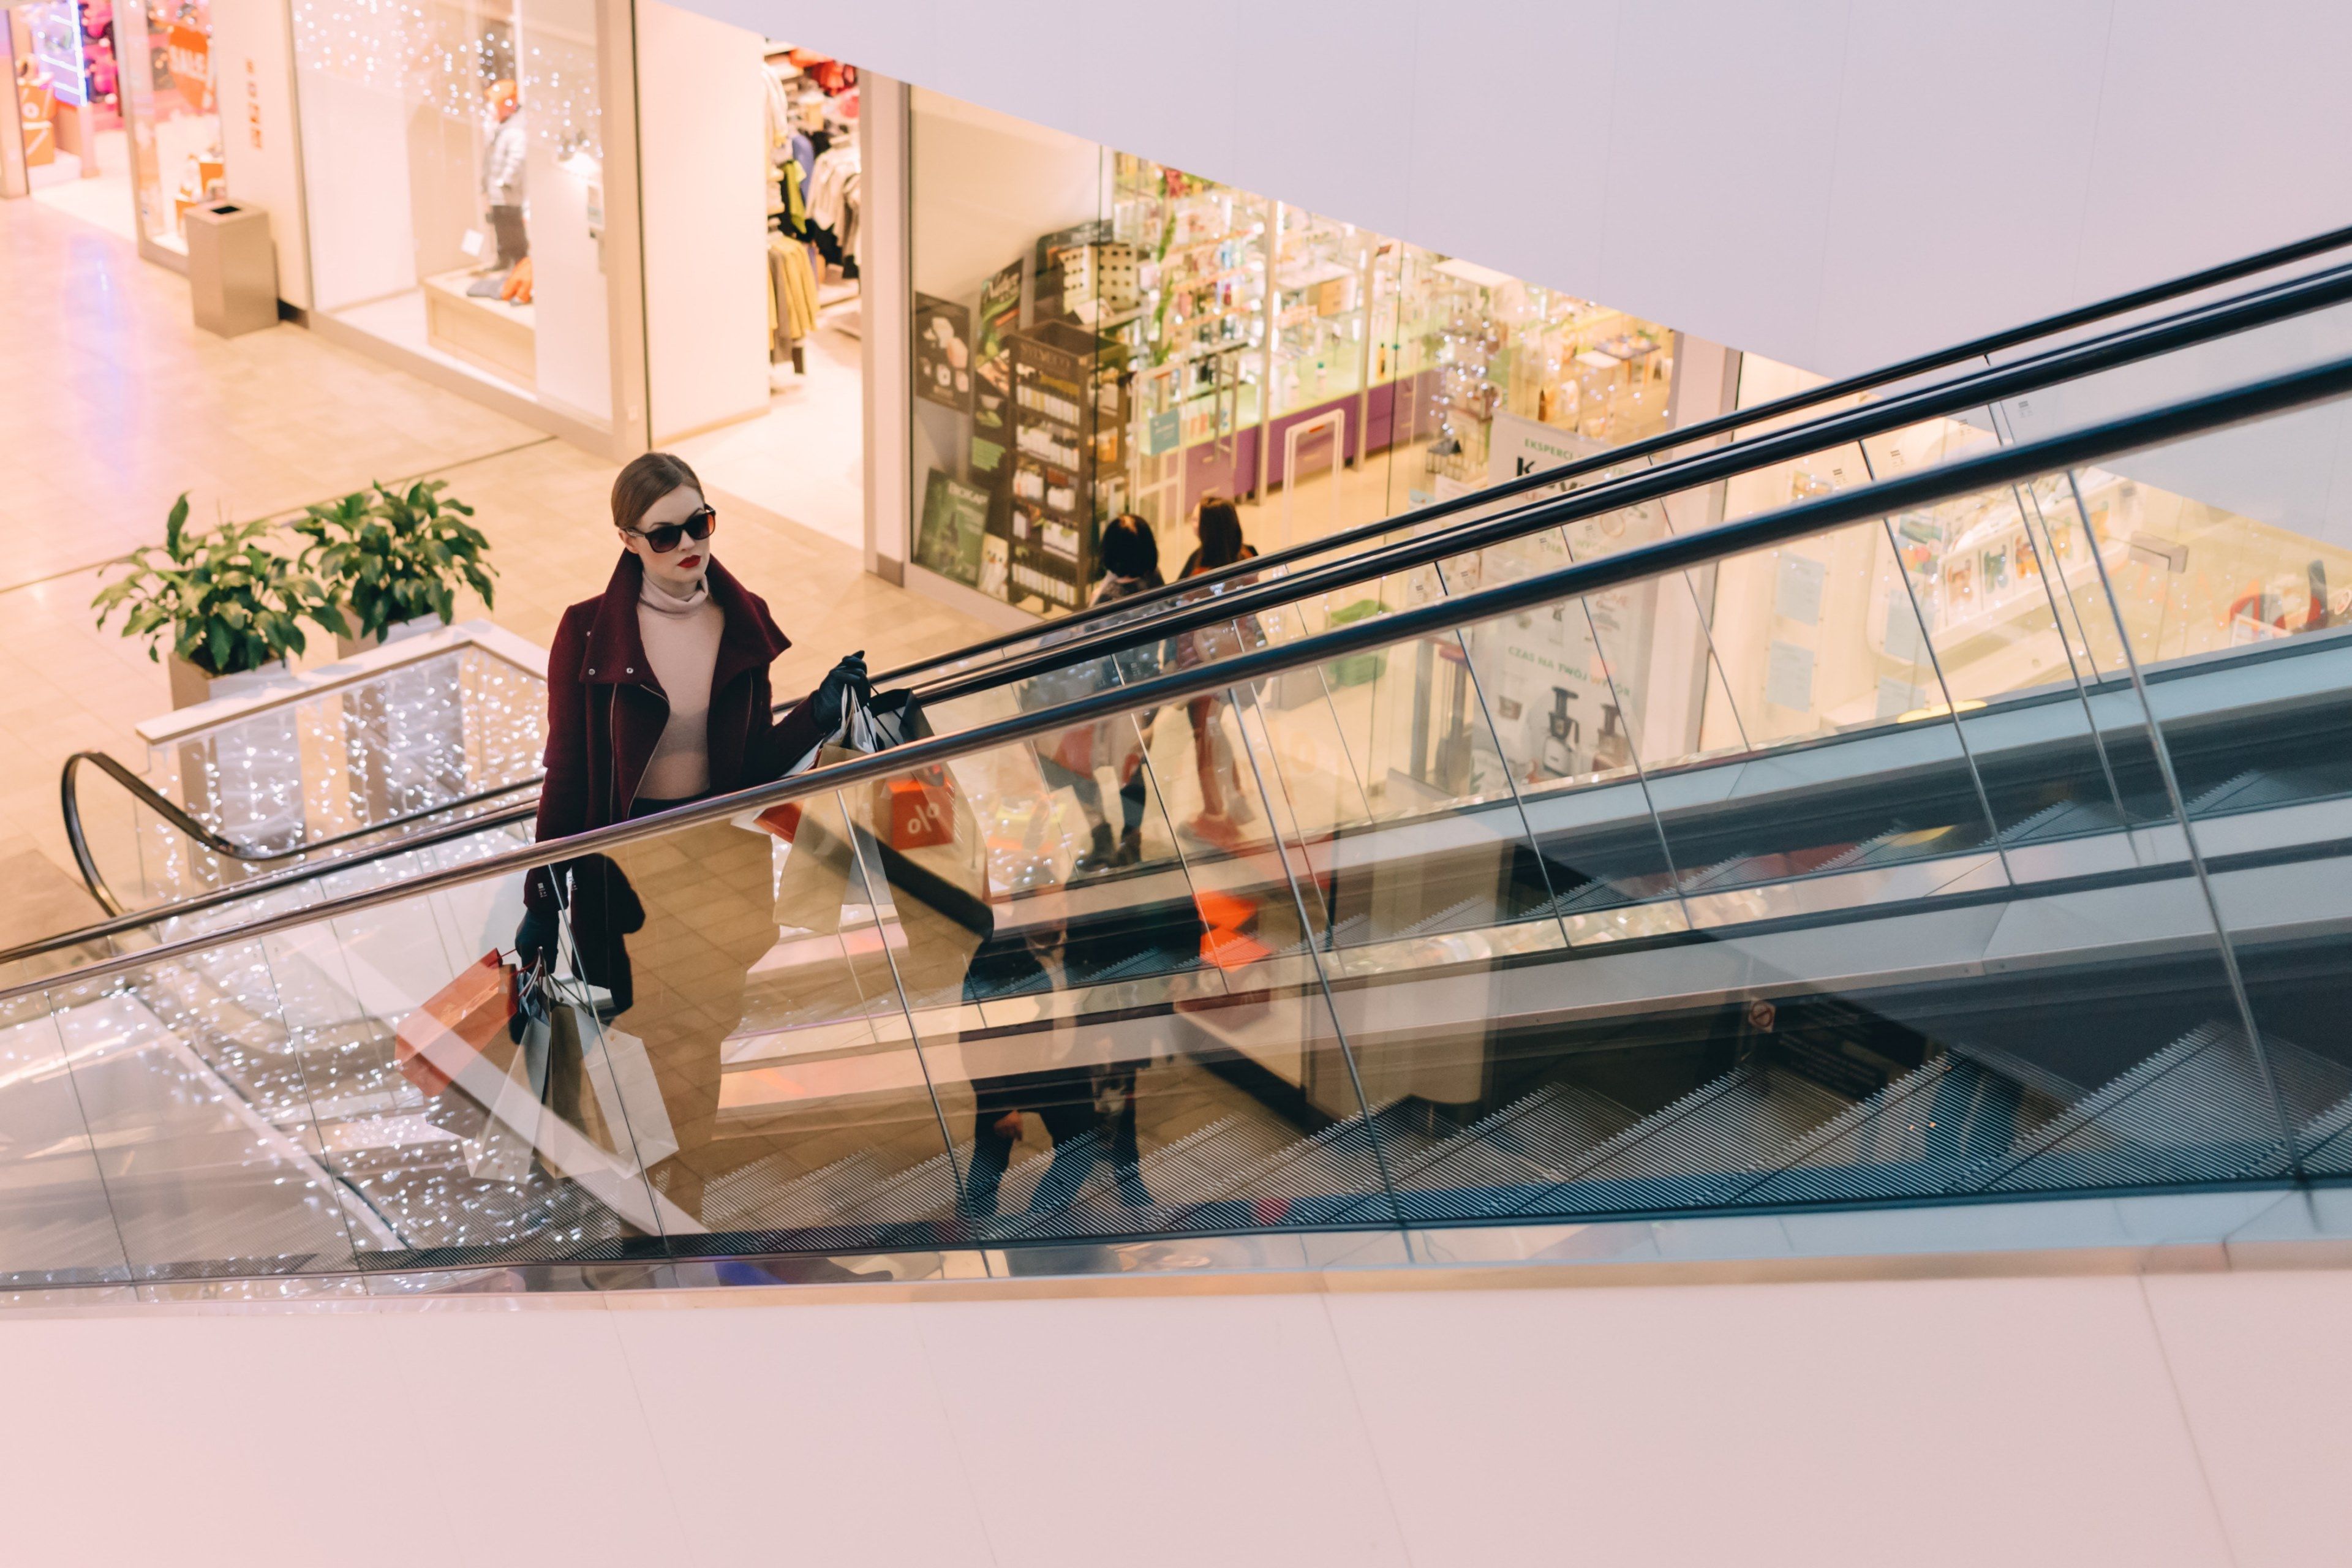 Wallpaper / chic woman in sunglasses holds bags up a mall escalator, mall shopping 4k wallpaper